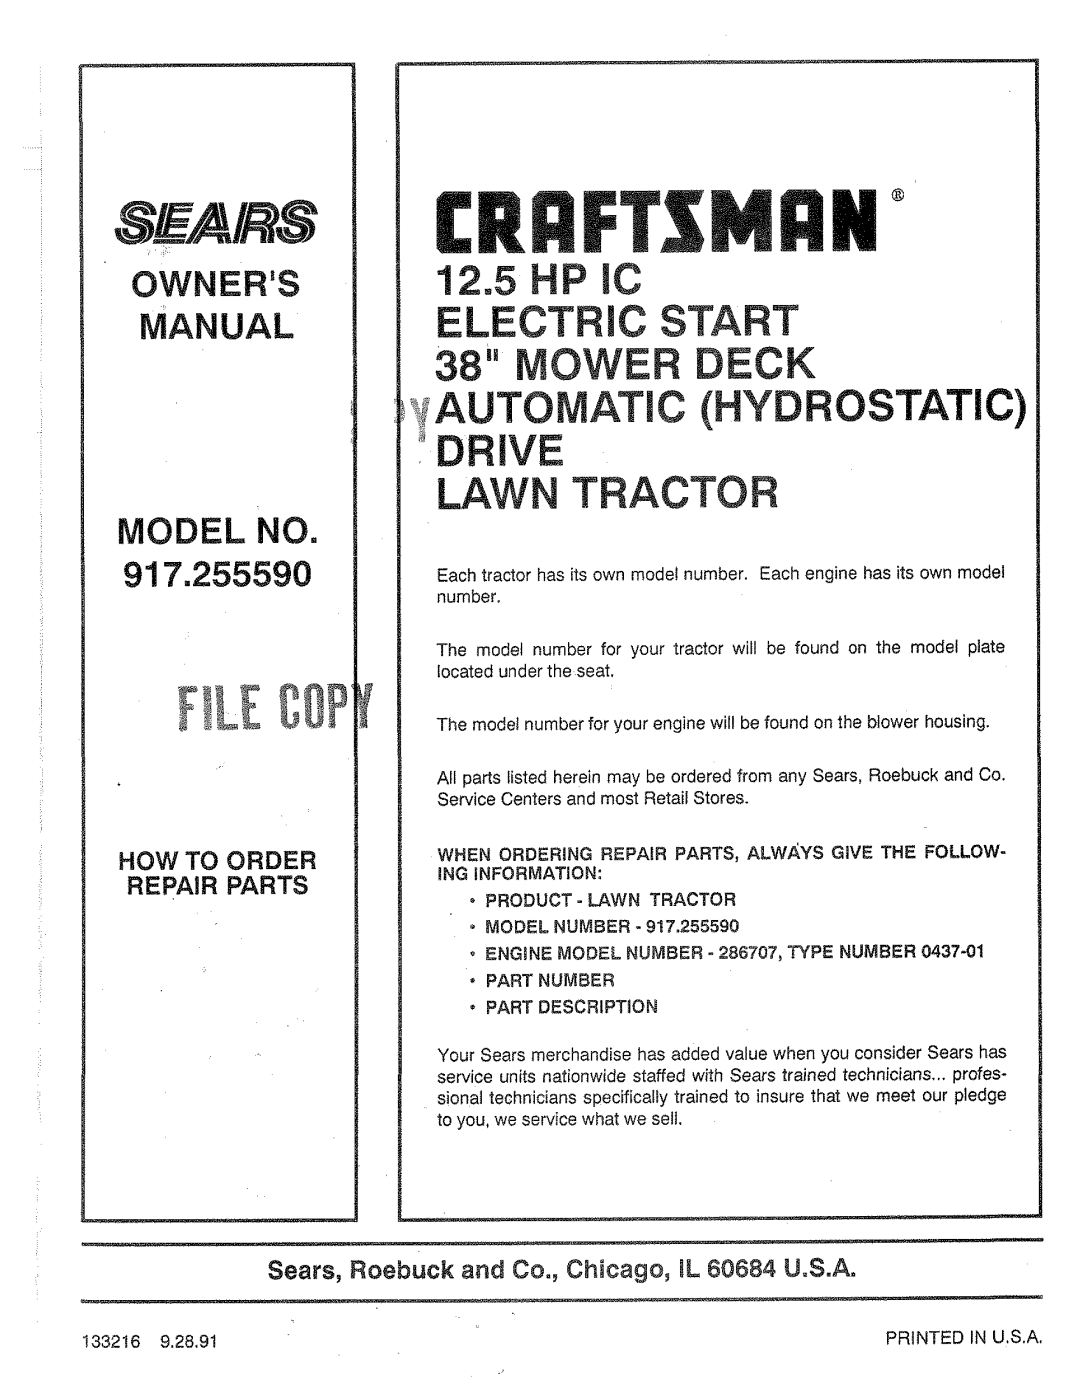 Sears 917.25559 Hp Jc, Manual, Electric Start, Mowe, Deck, _Automatic, Hydrostatic, Law Tractor, Owners, •Part Description 